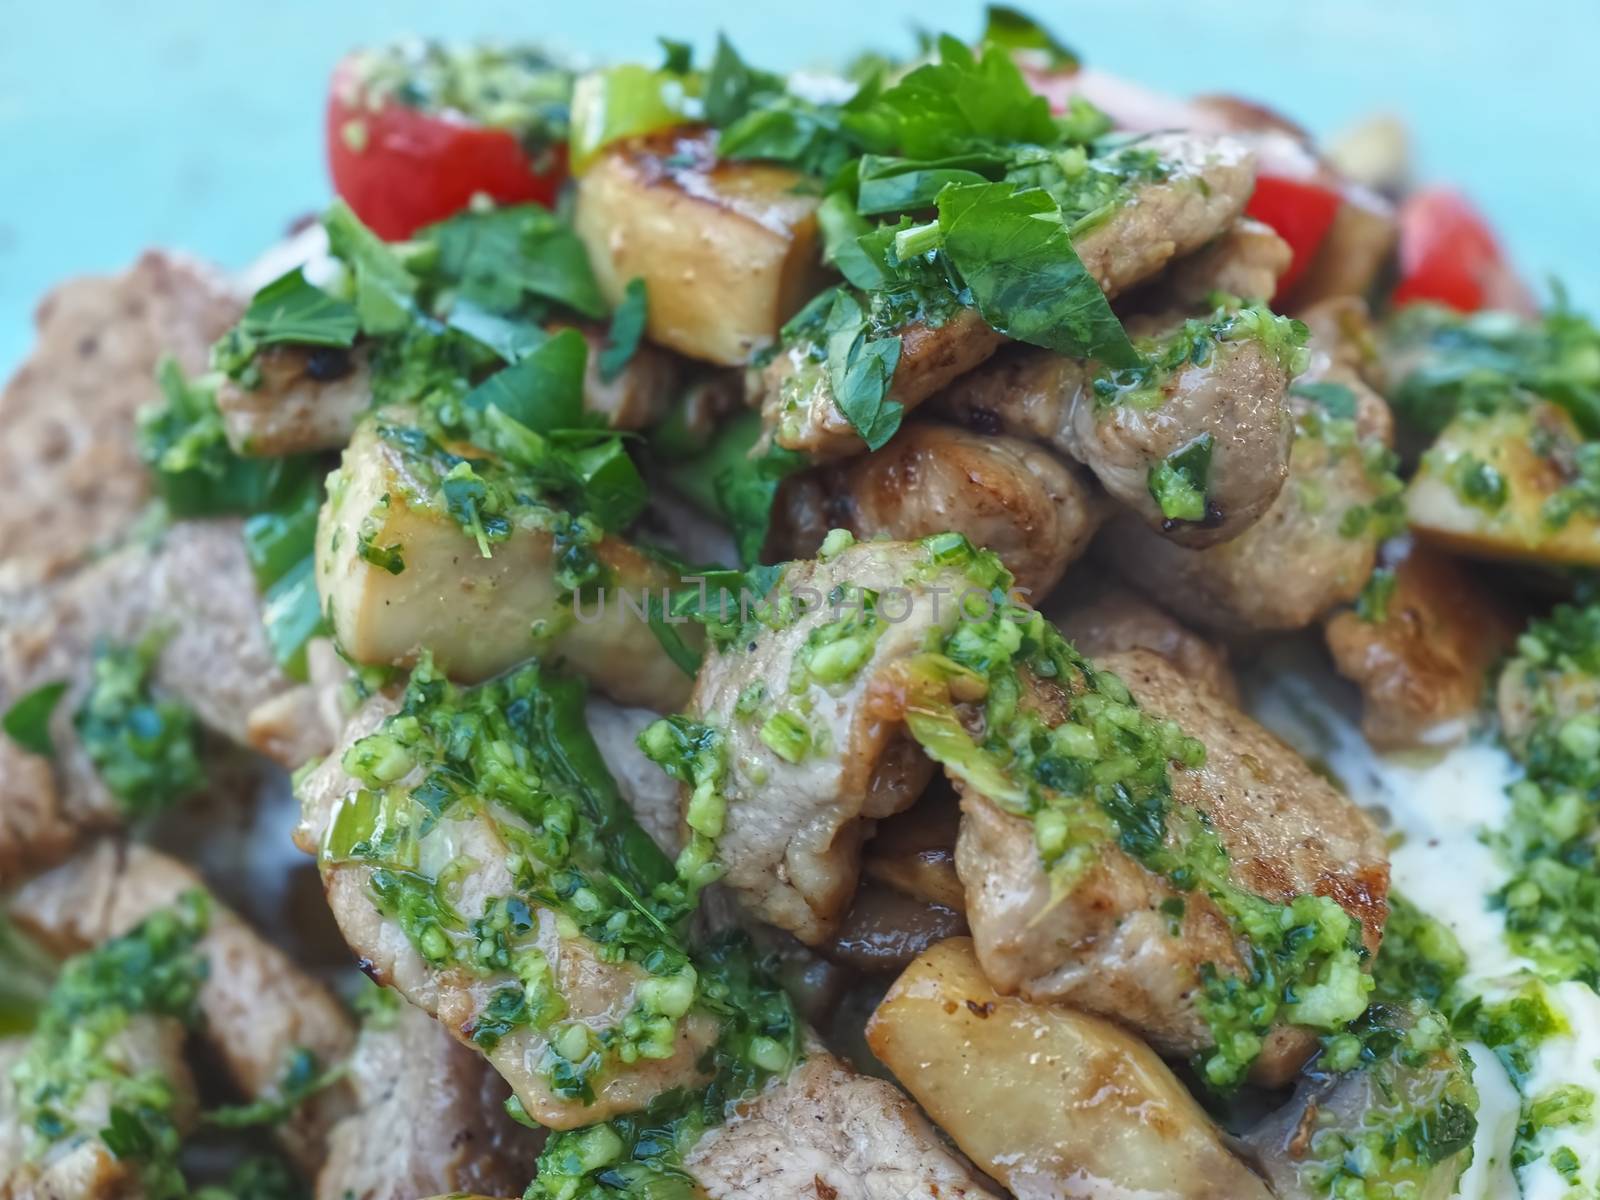 modern cooking with pork tenderloin, potatoes, sour creme and herbs